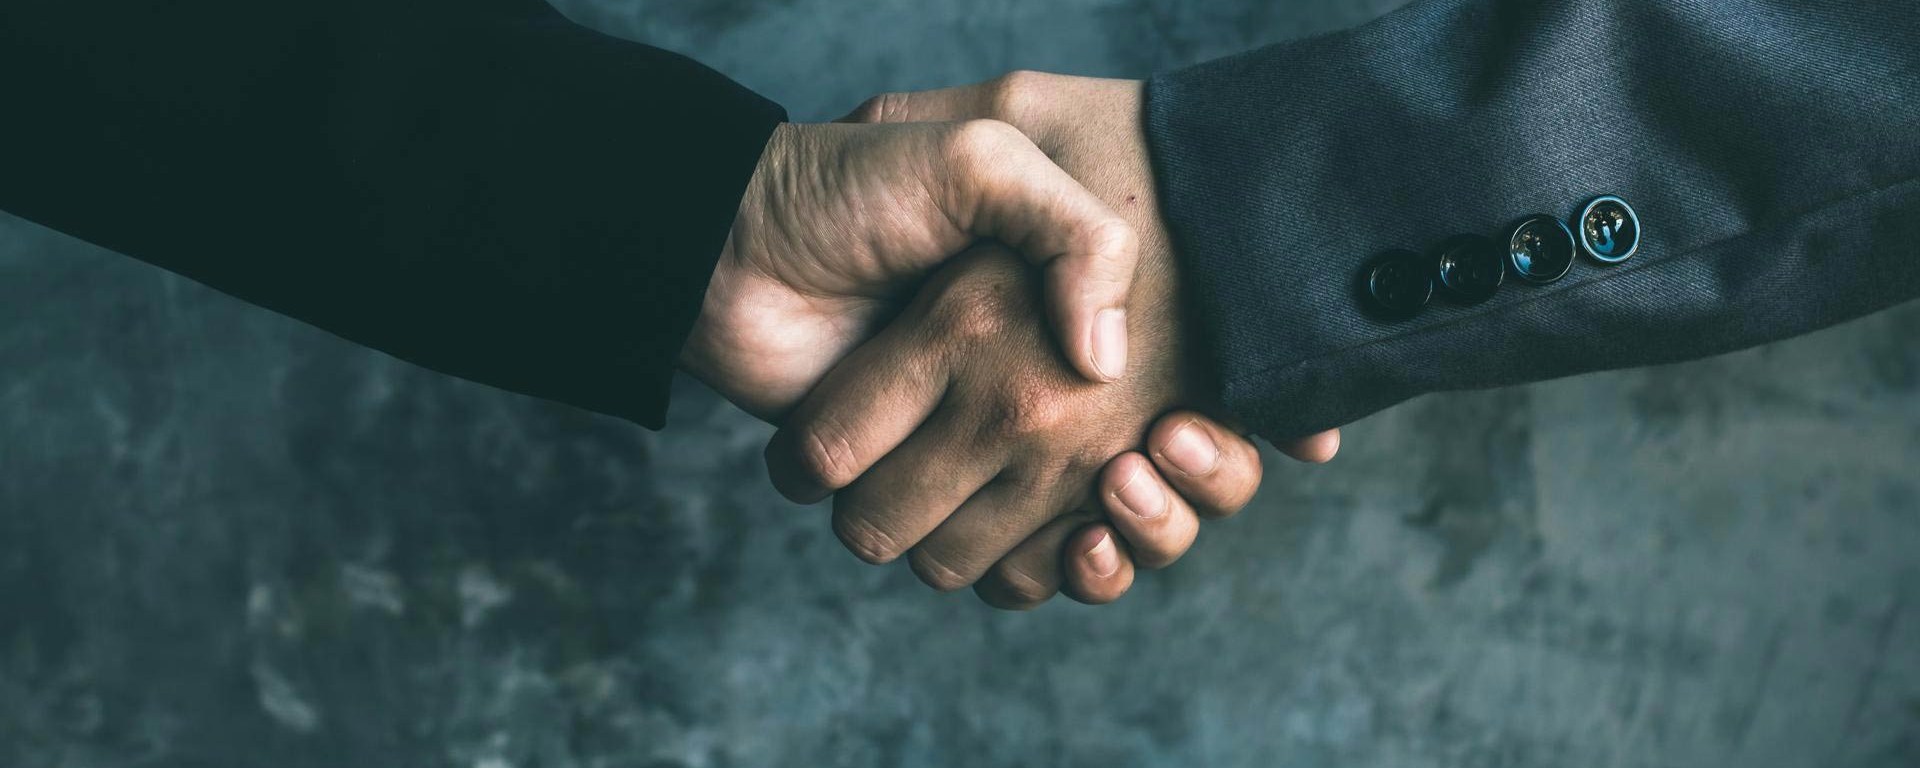 Two businessmen in suit shake hands in business relationship